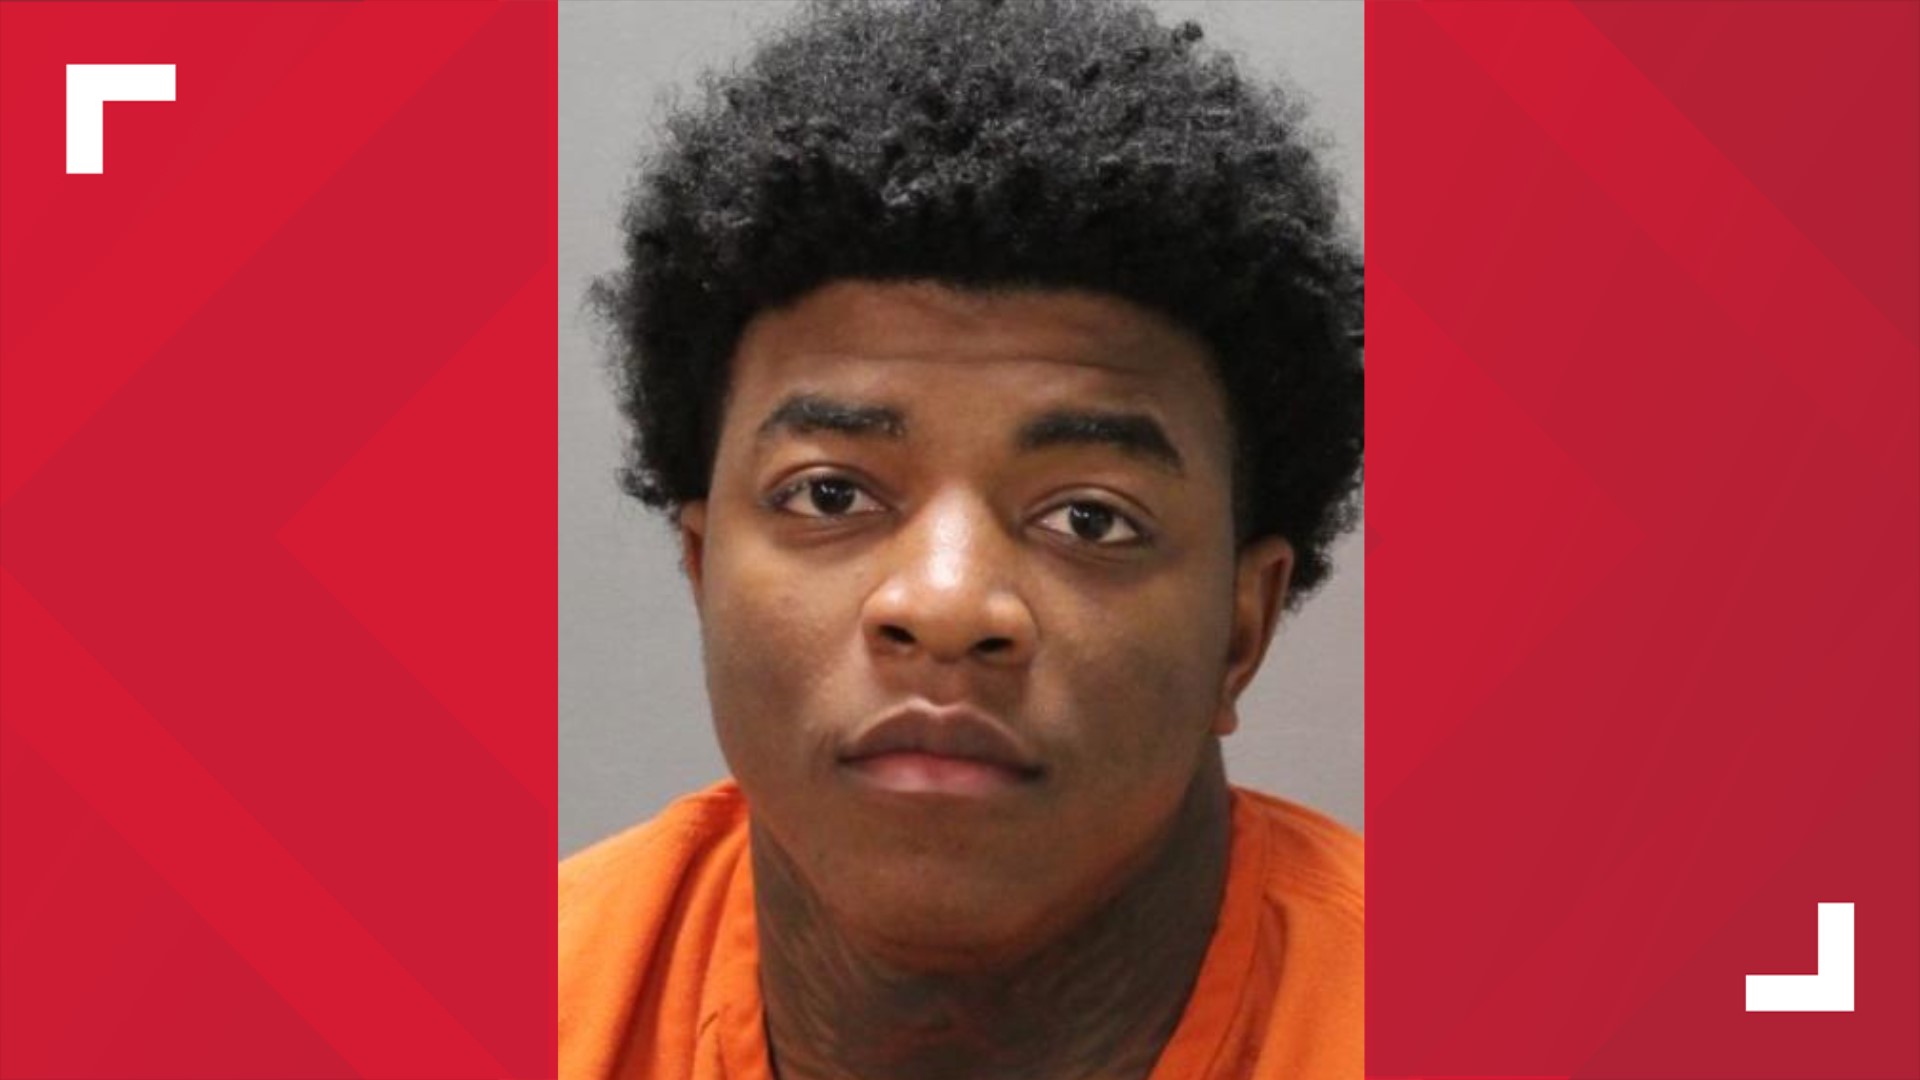 Keyanta Bullard, a rapper known as Yungeen Ace, was arrested late Monday accused of possession of a firearm, weapon or ammunition.